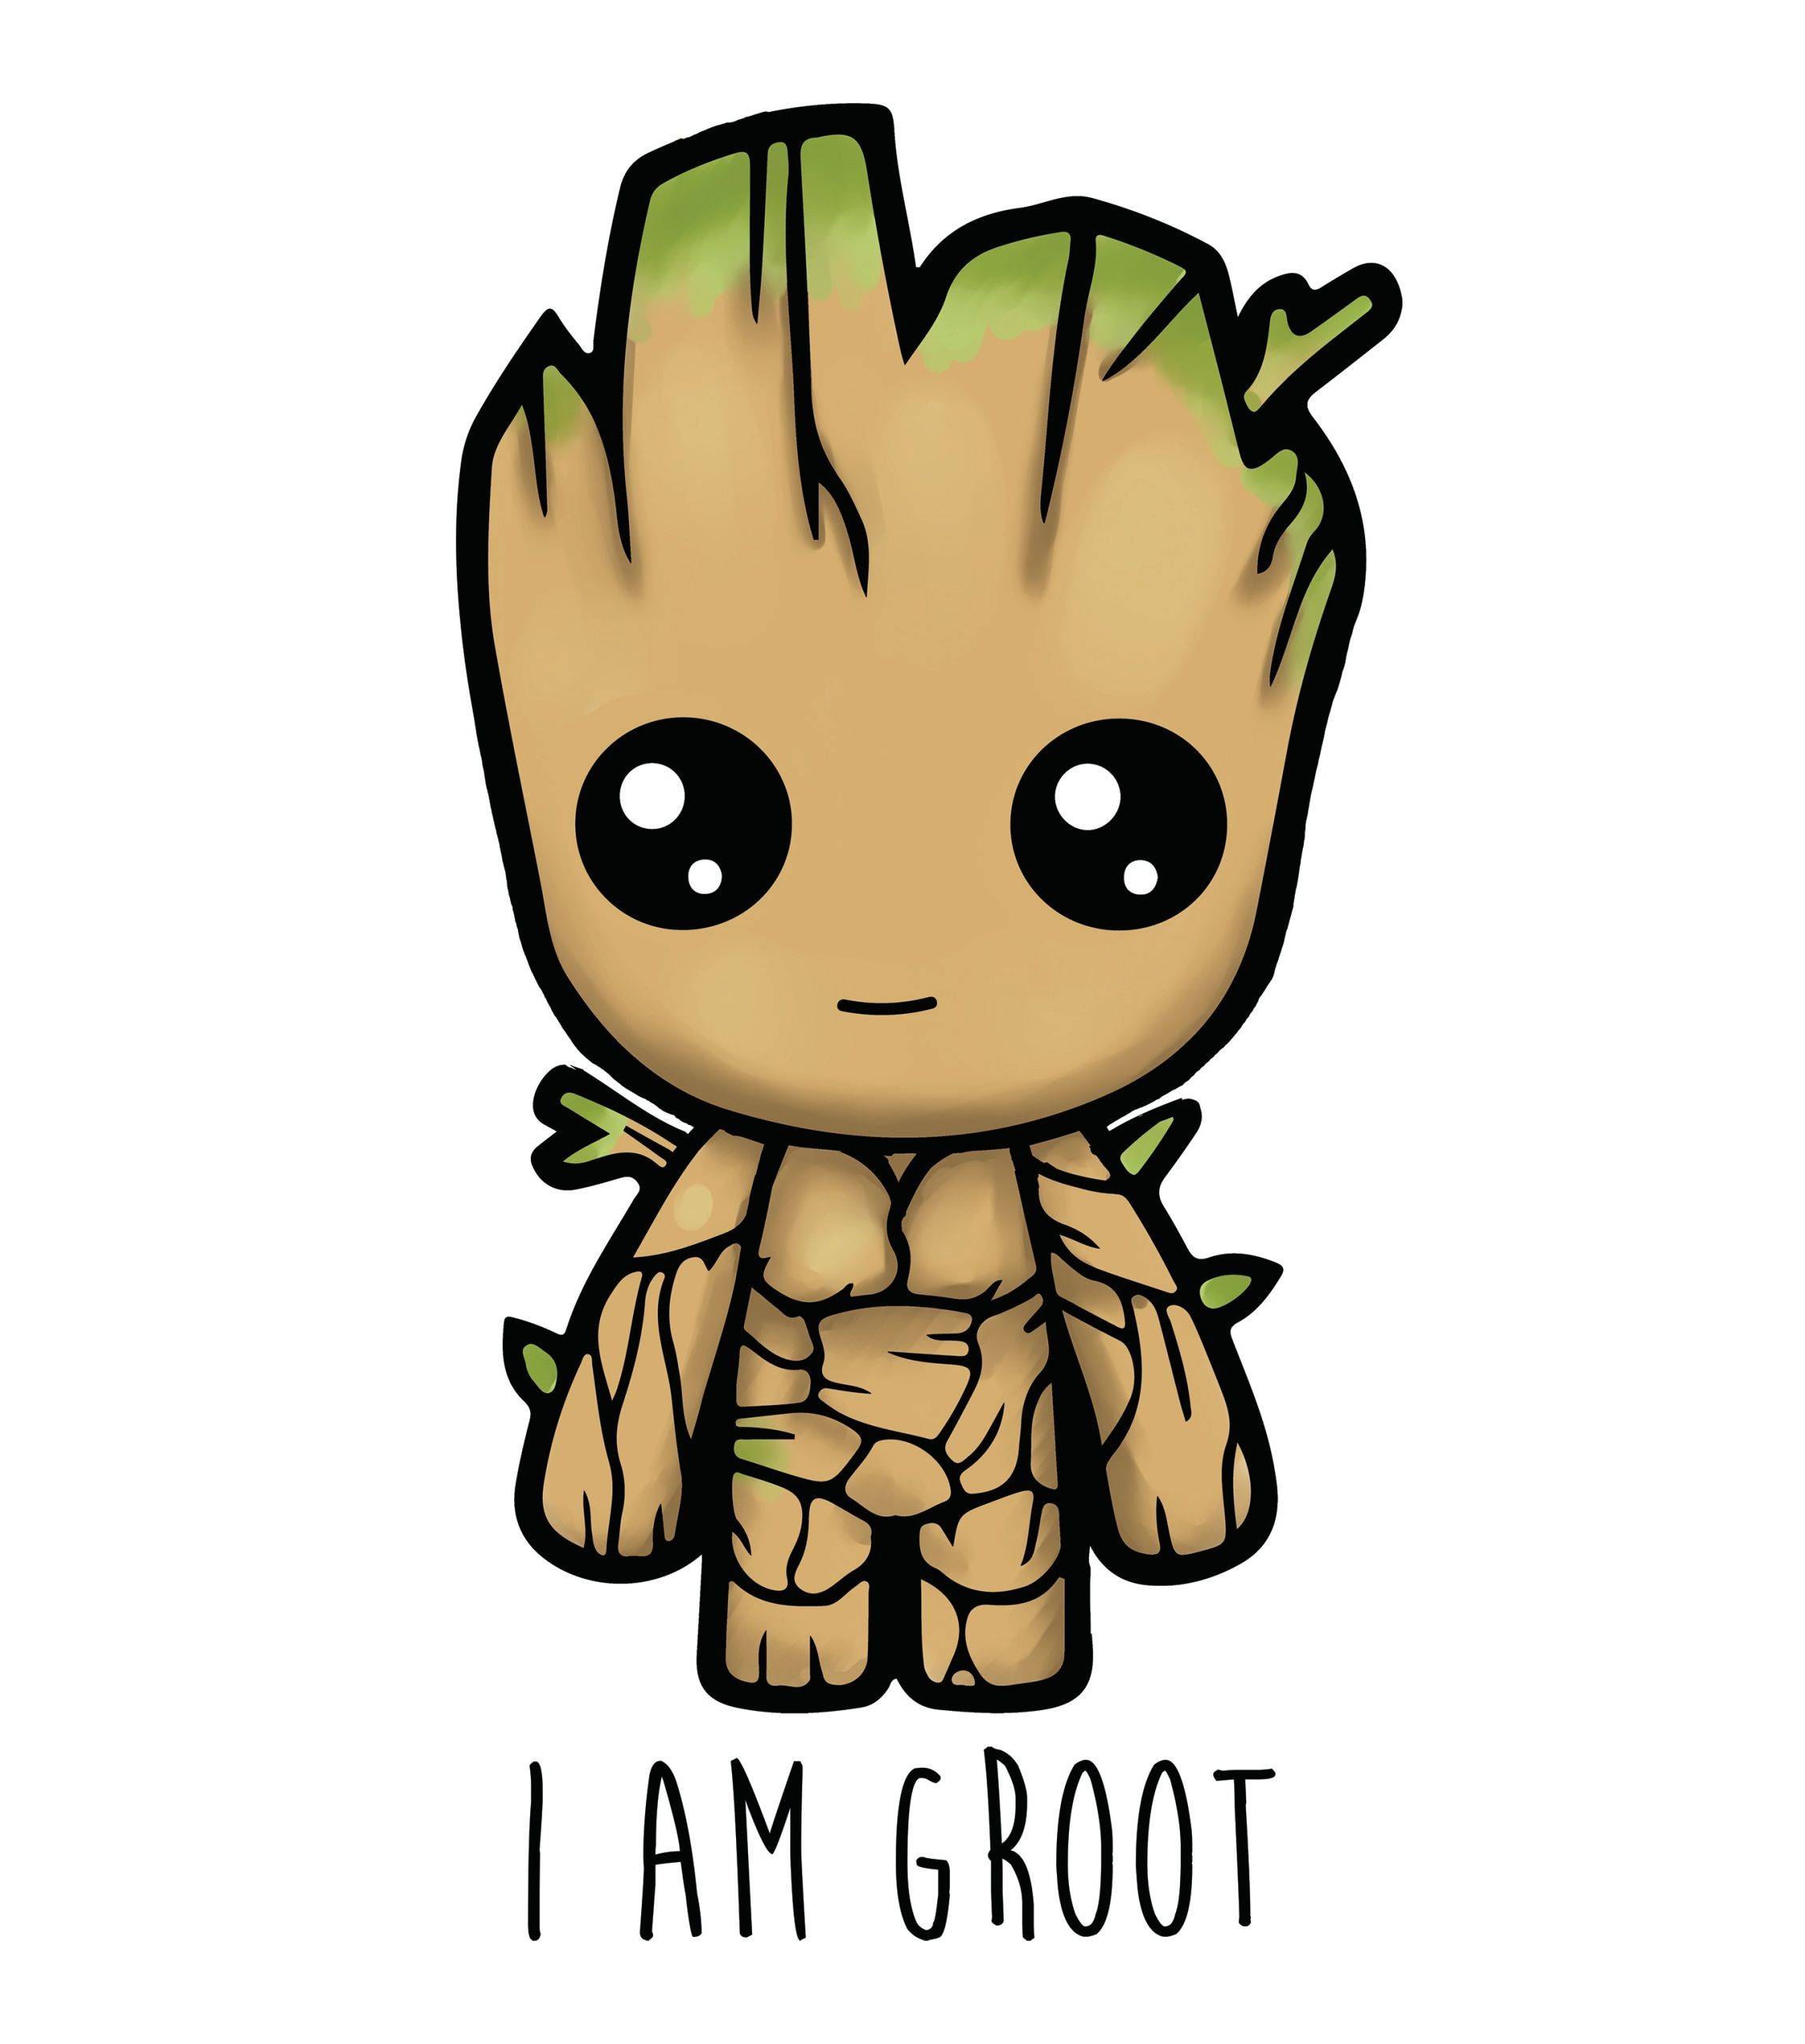 Anime Groot Wallpapers Wallpaper Cave